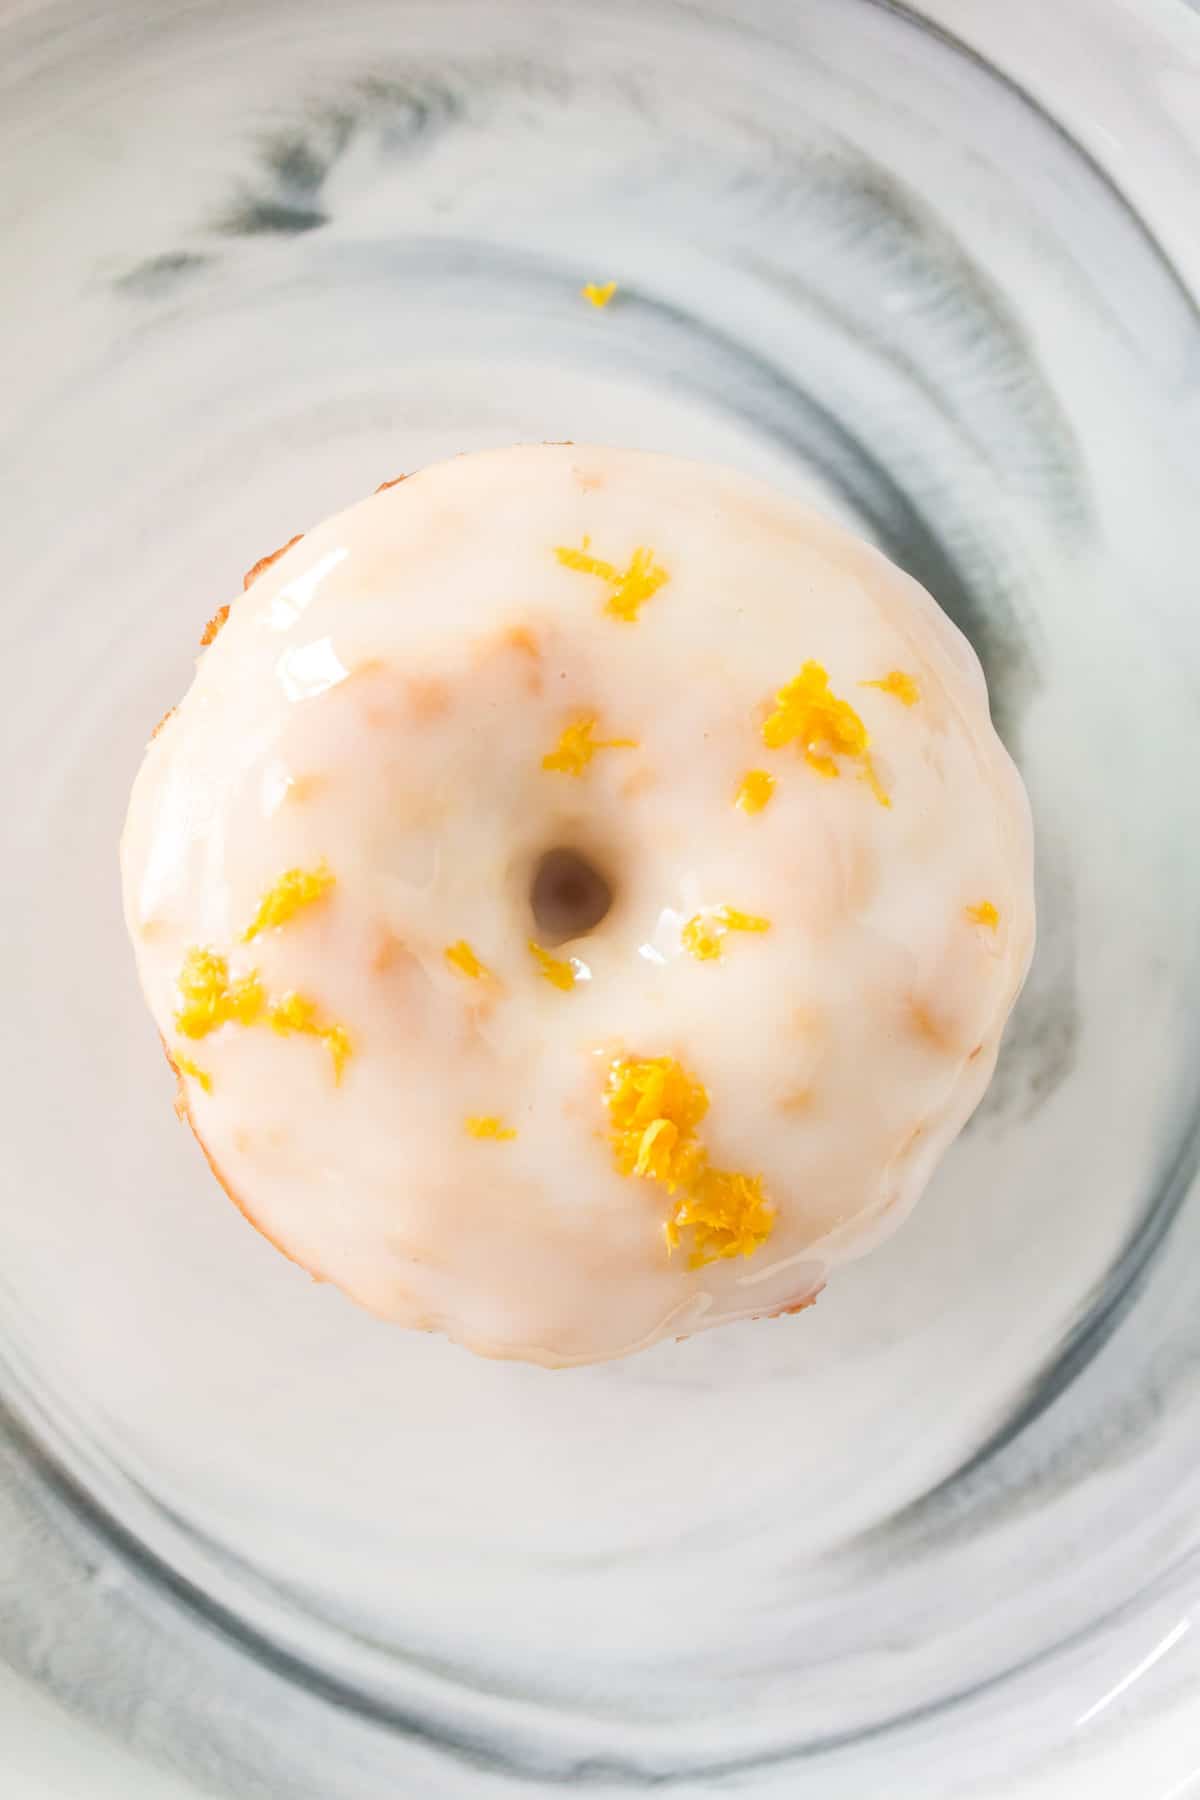 Overhead view of a donut with white frosting and lemon zest.